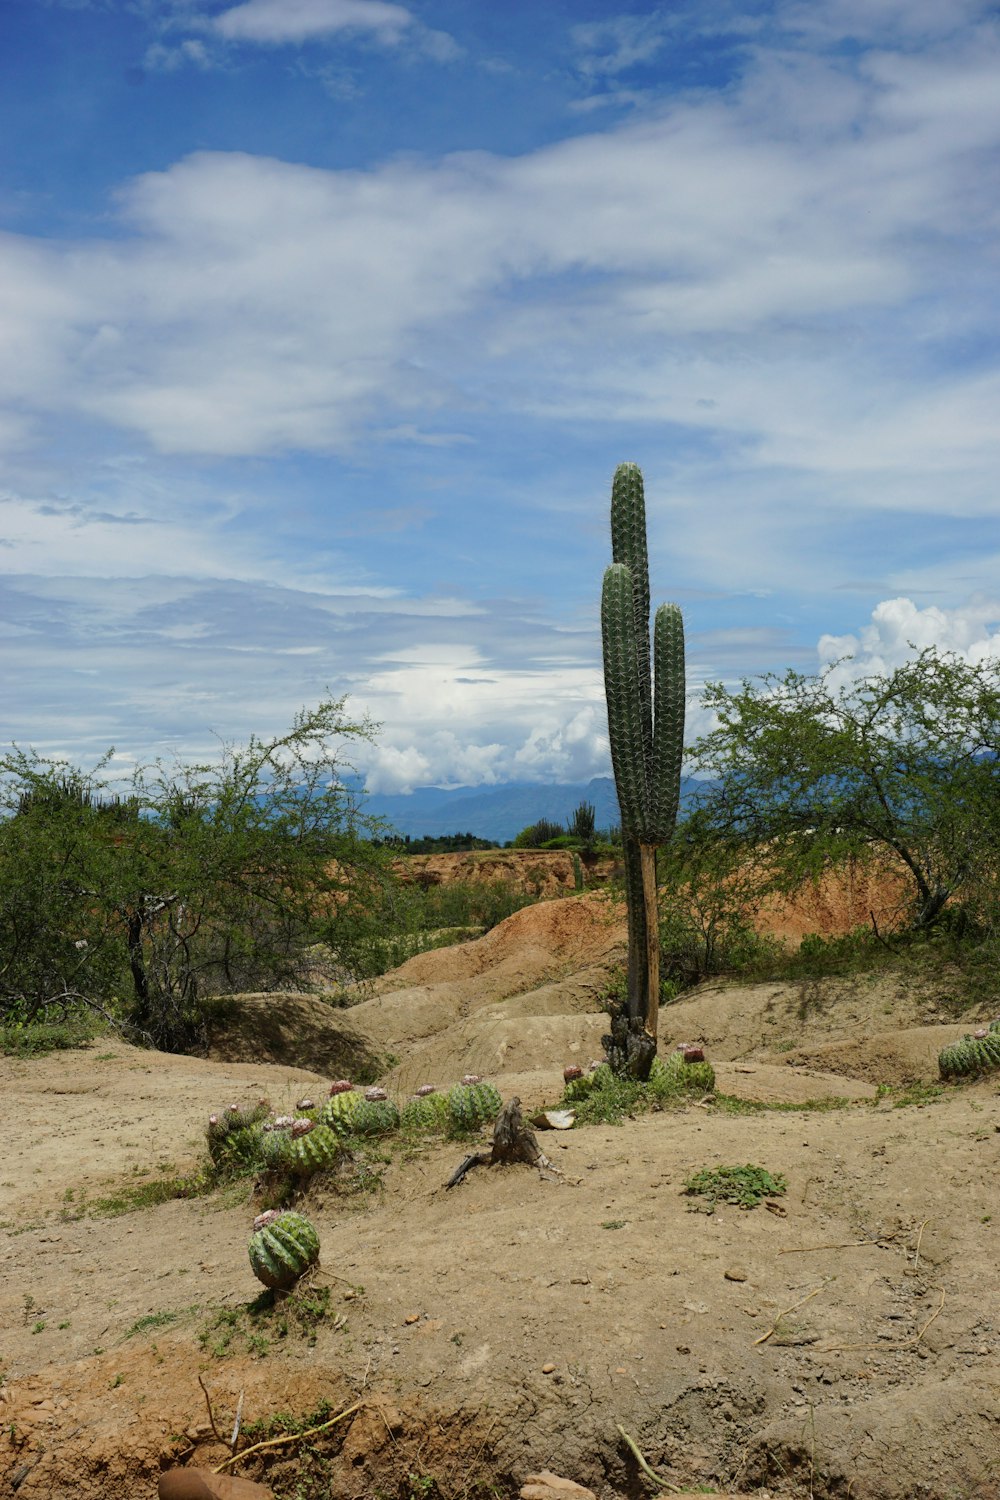 a large cactus in the middle of a desert